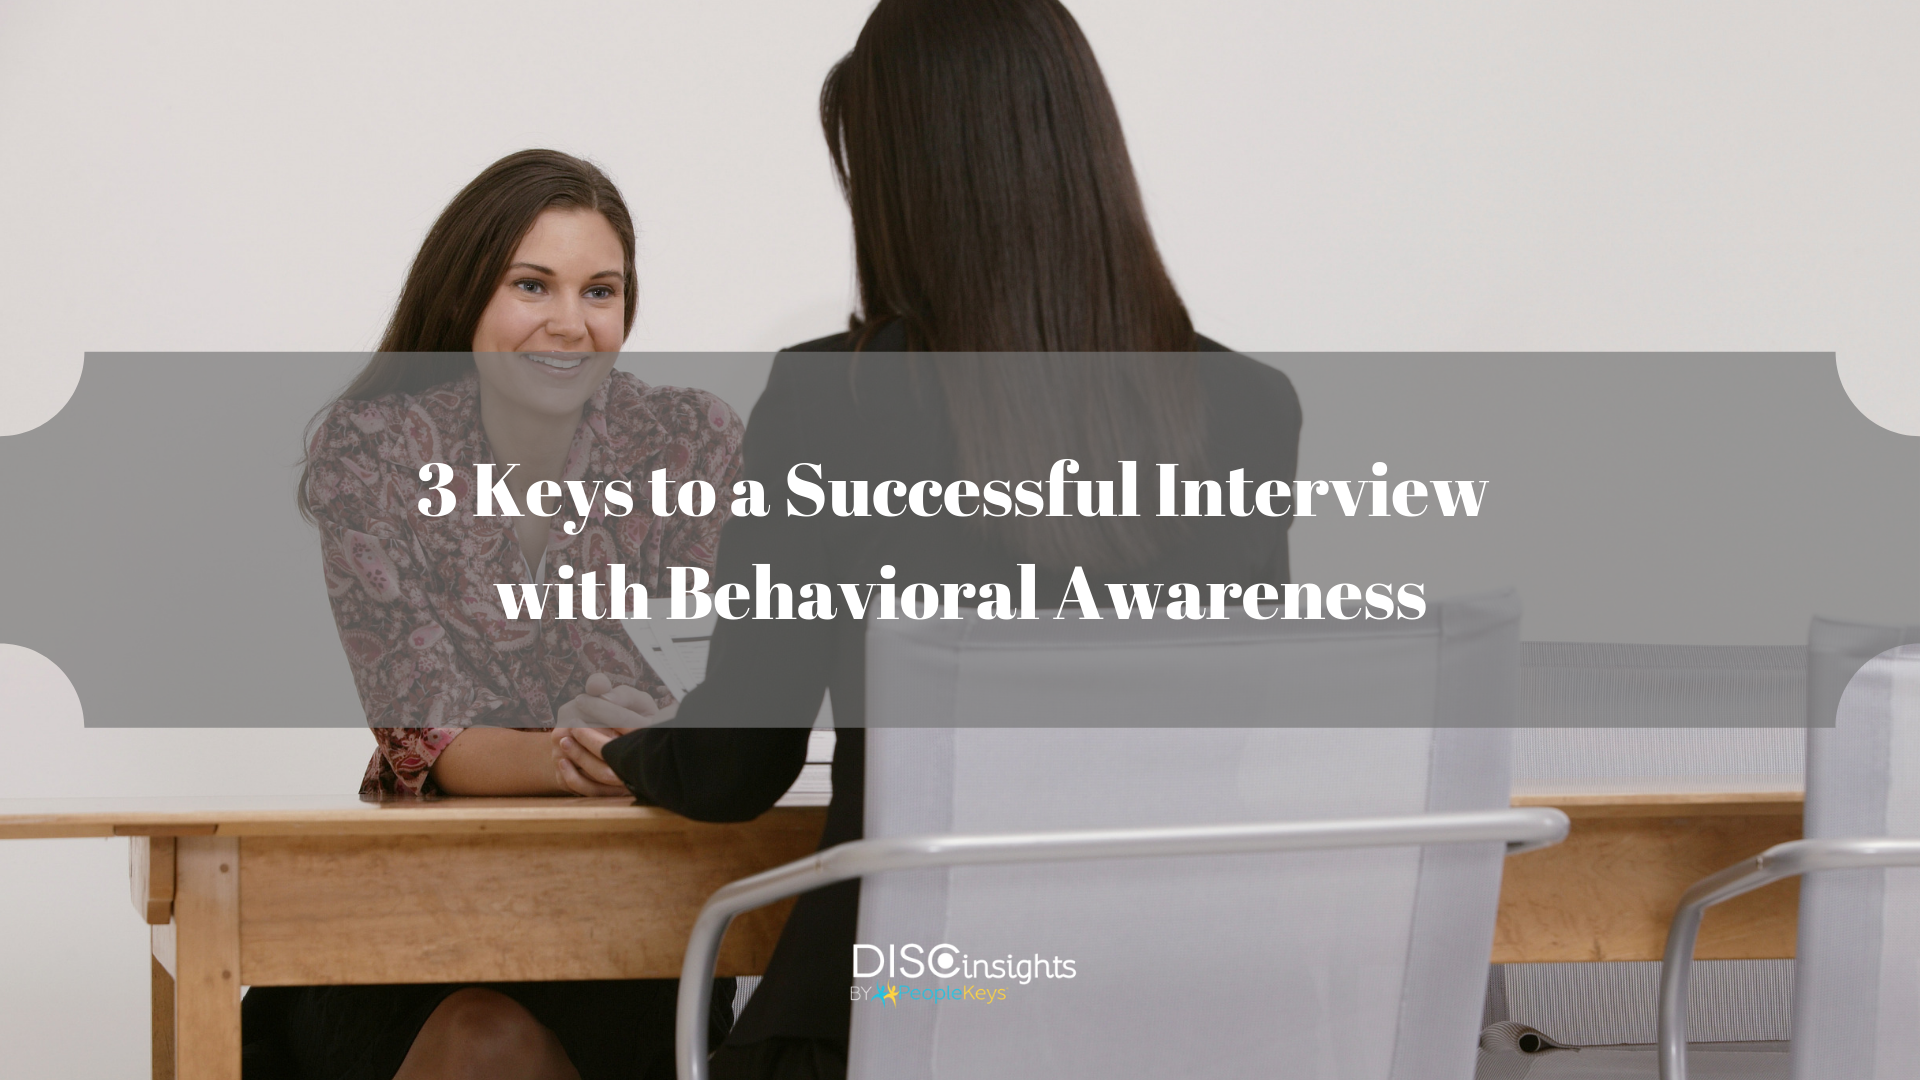 3 Keys to a Successful Interview with Behavioral Awareness